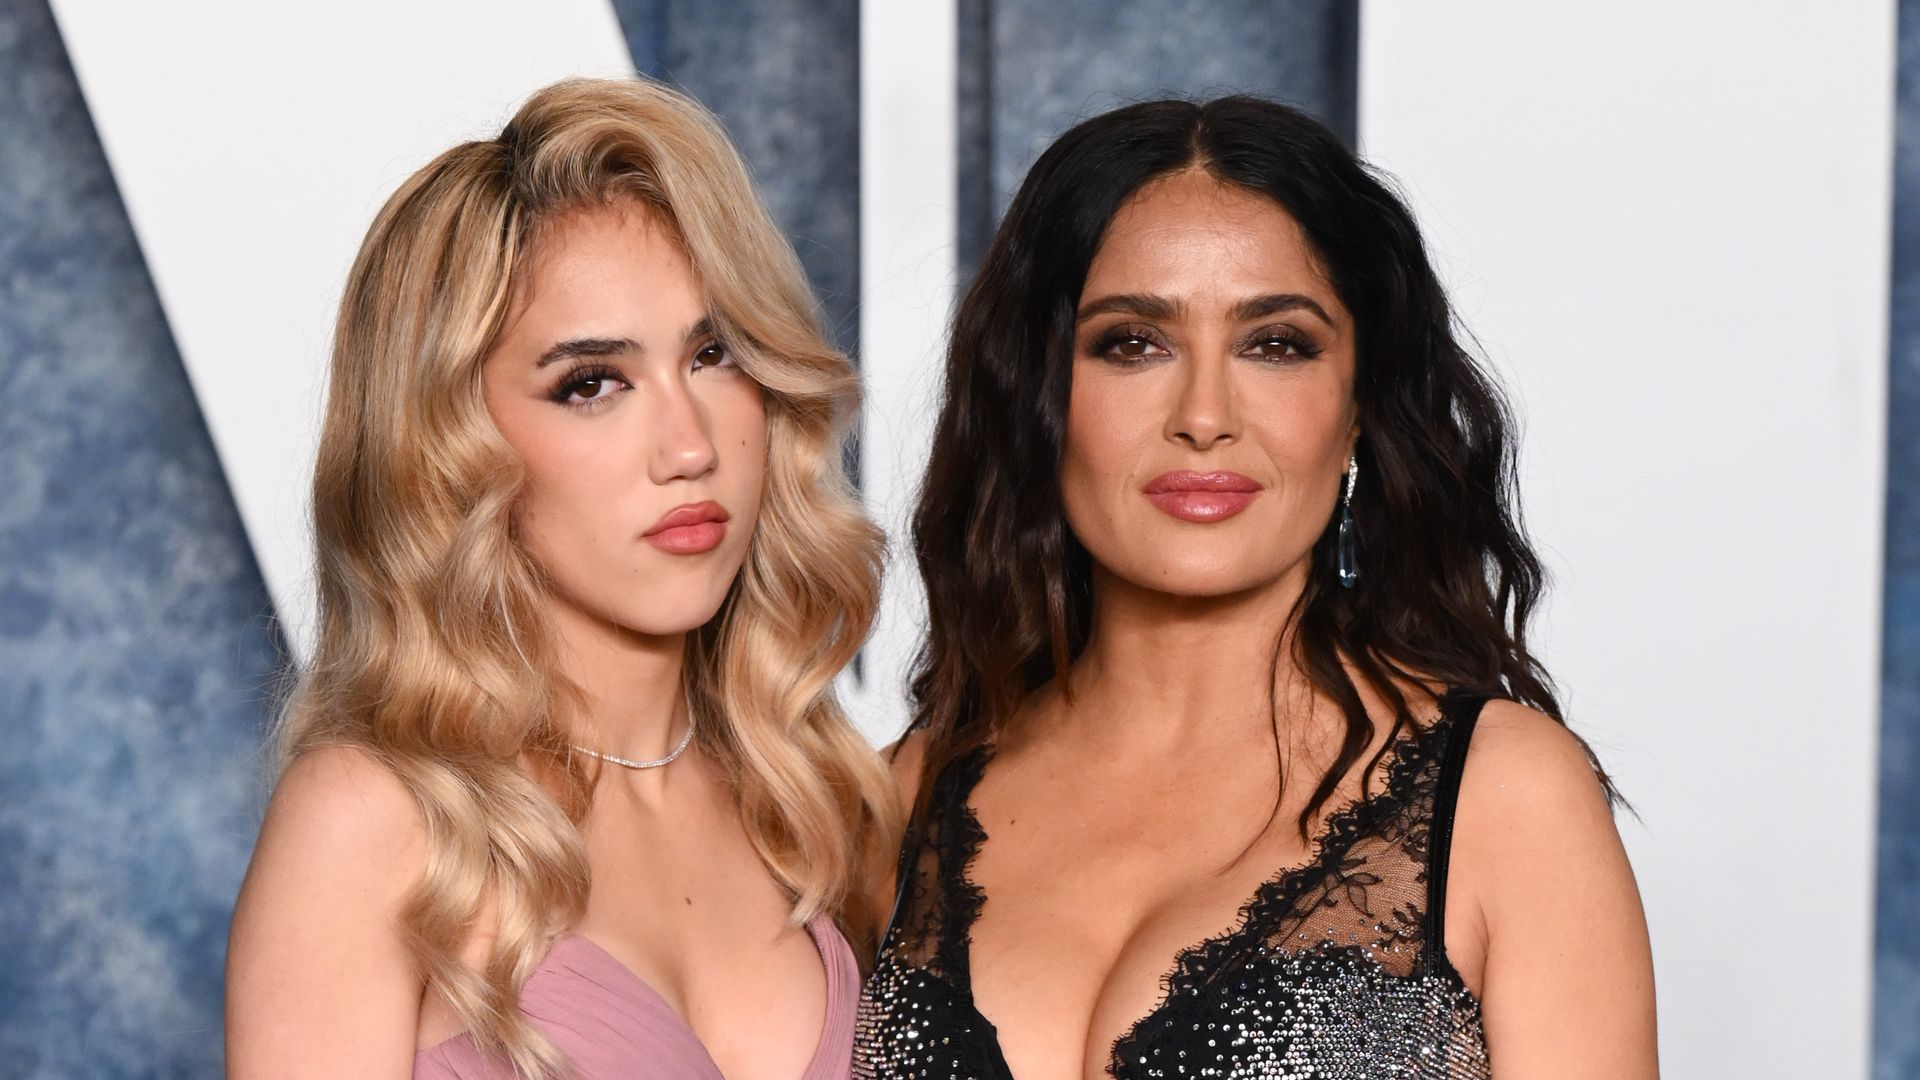 Valentina Paloma Pinault and Salma Hayek attend the 2023 Vanity Fair Oscar Party hosted by Radhika Jones at Wallis Annenberg Center for the Performing Arts on March 12, 2023 in Beverly Hills, California.